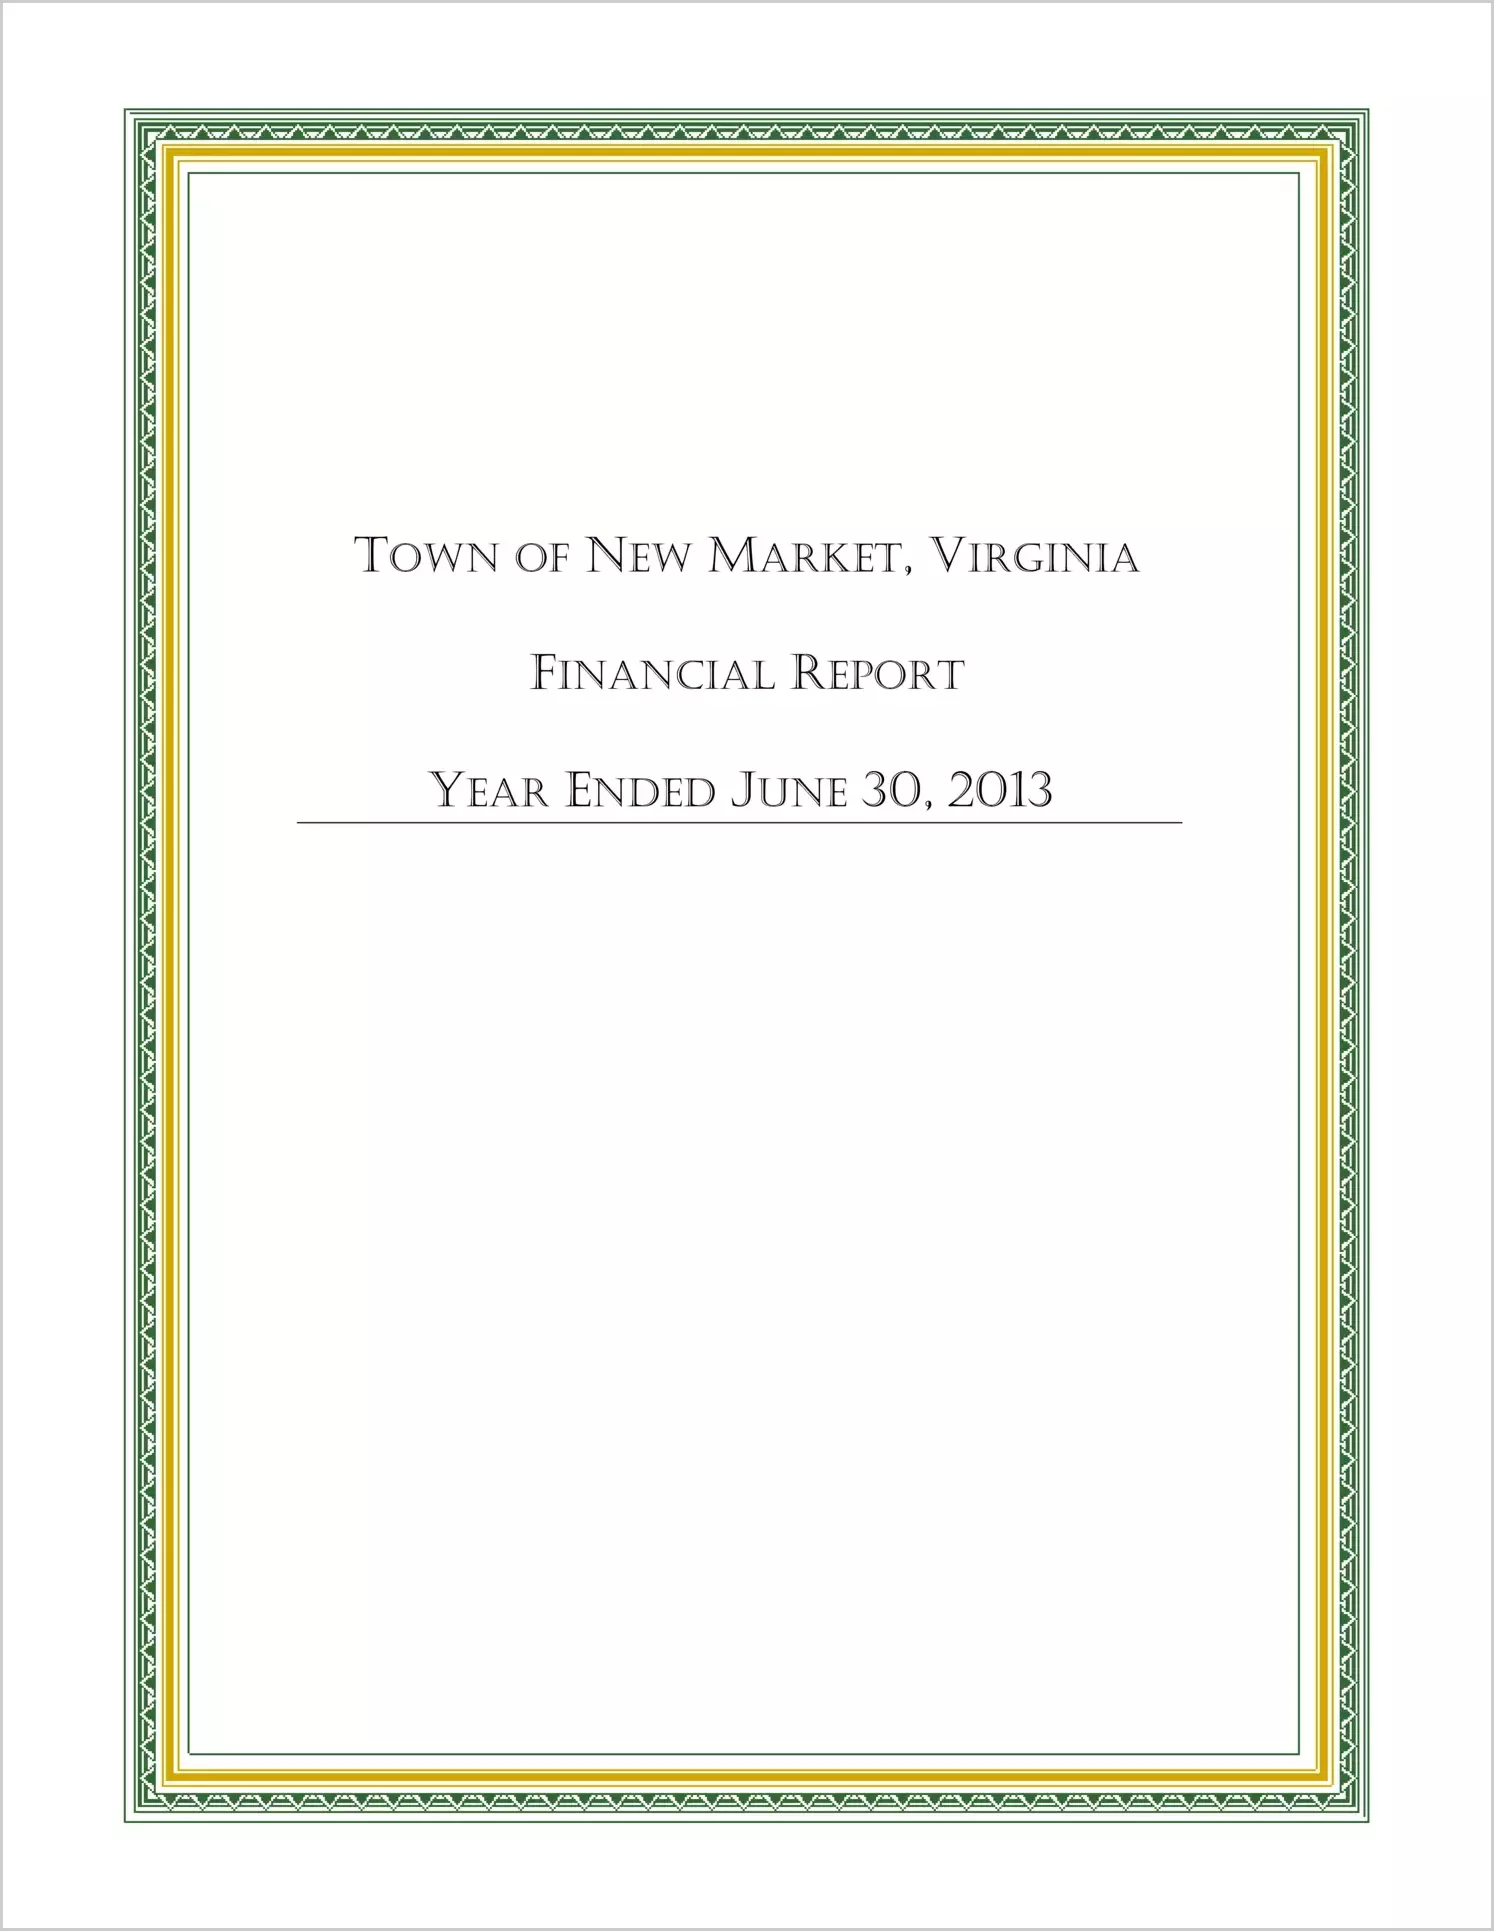 2013 Annual Financial Report for Town of New Market